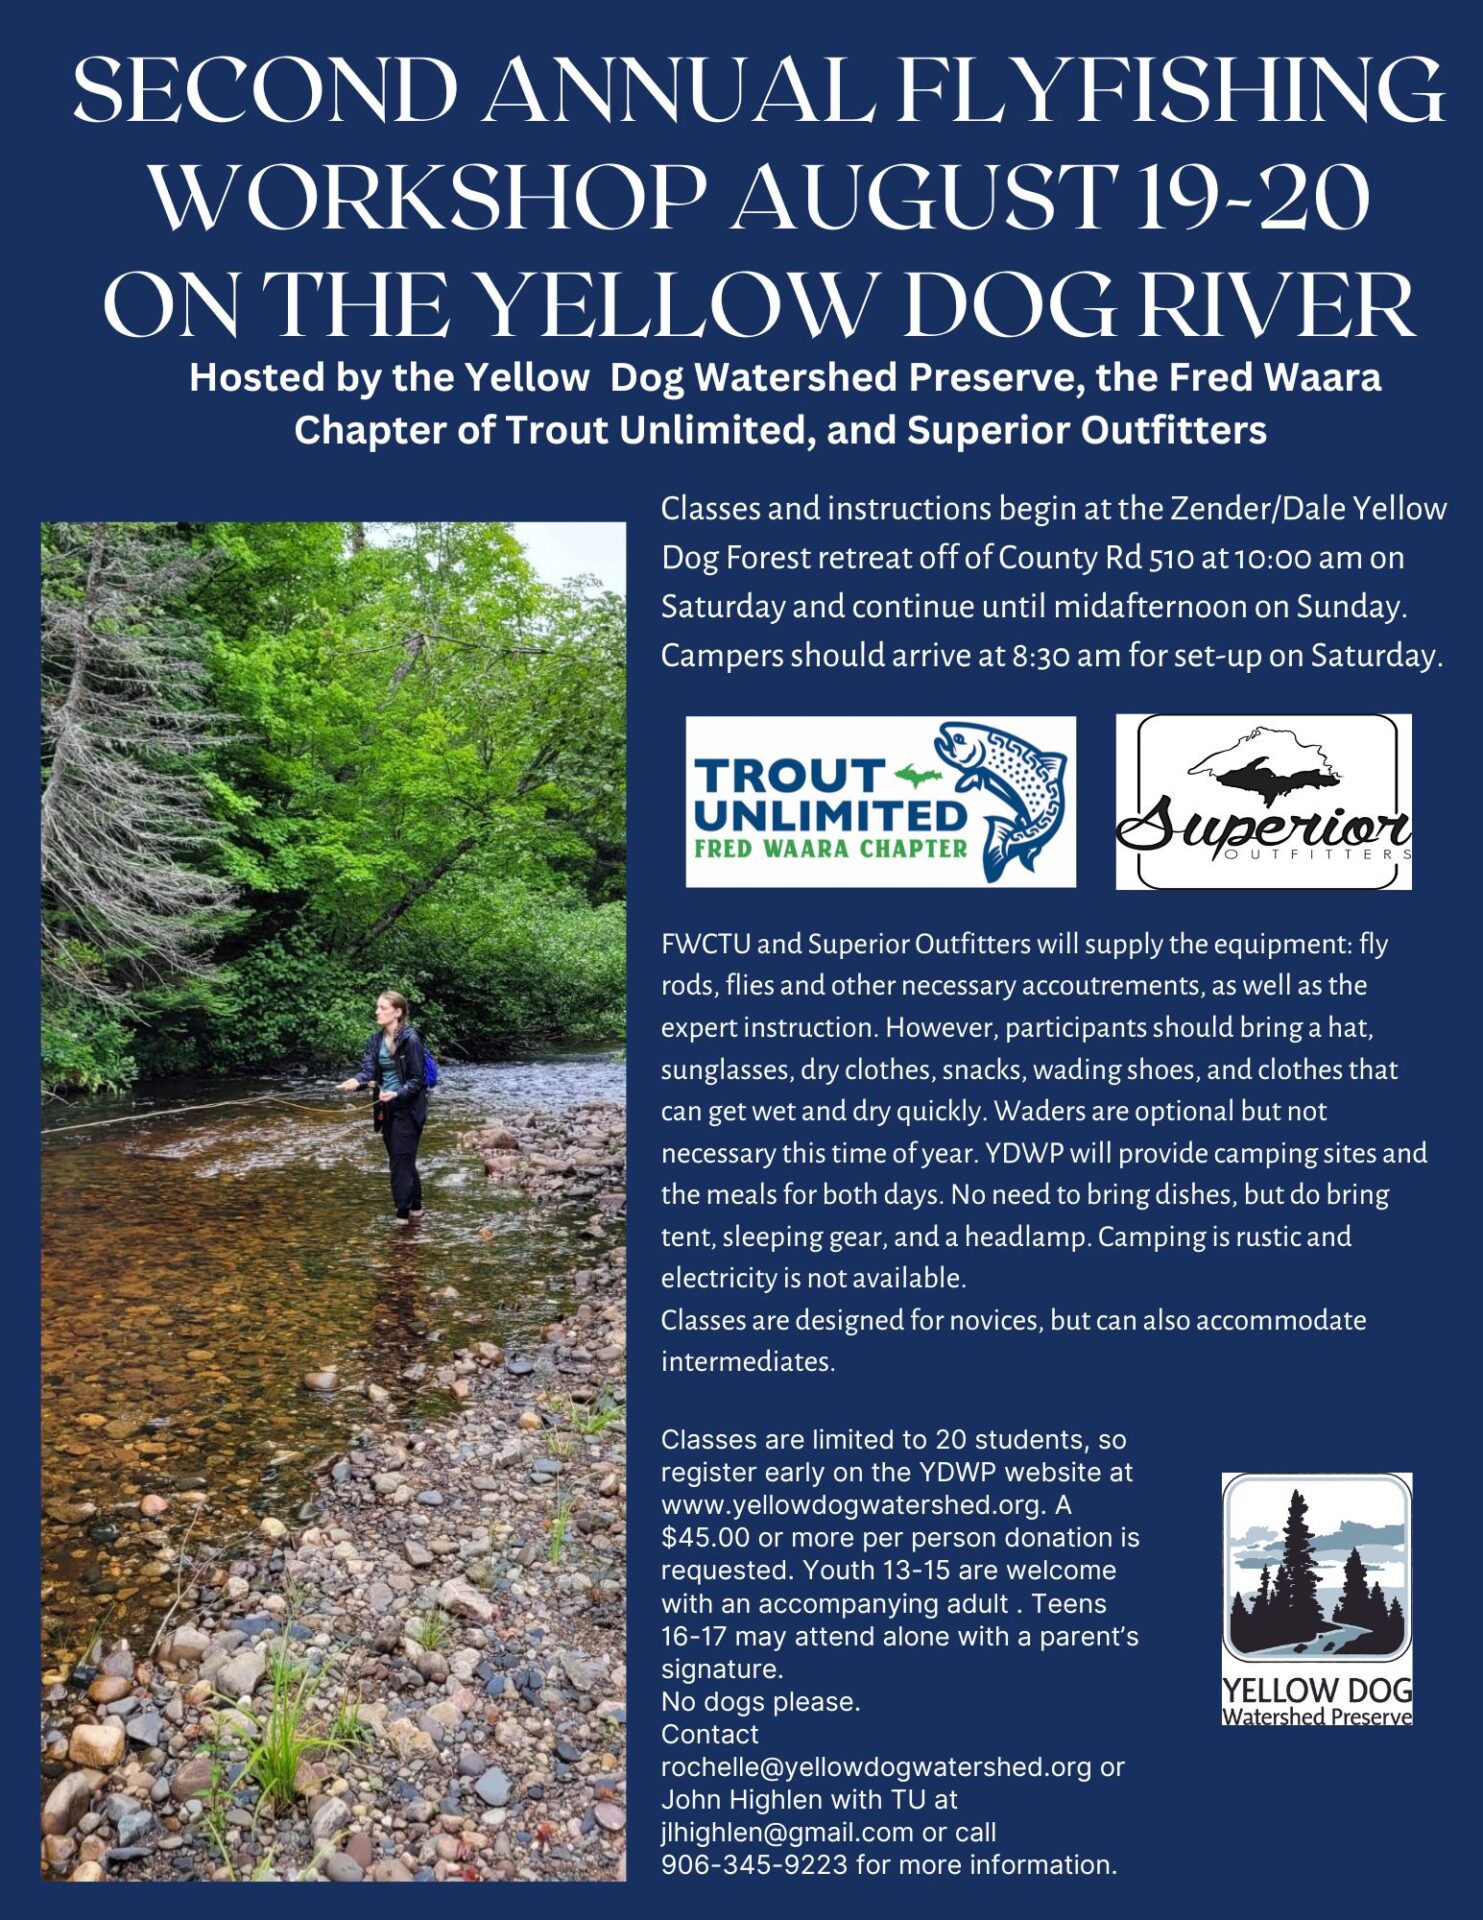 Second Annual Flyfishing Workshop August 19-20